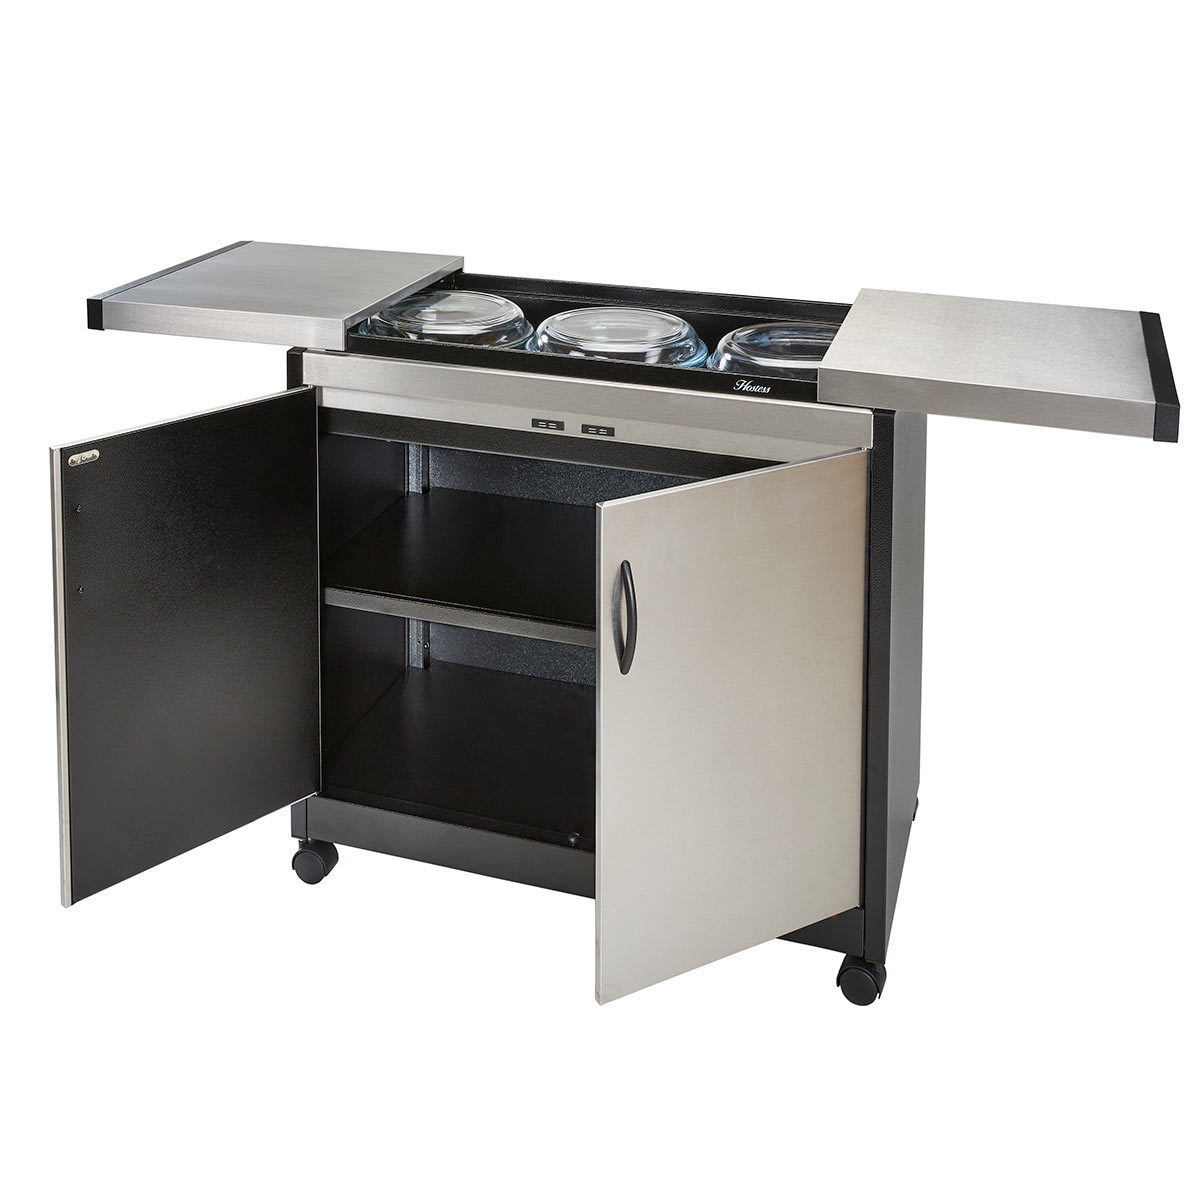 Hostess Heated Trolley with Brushed Steel Finish, HL6232BS